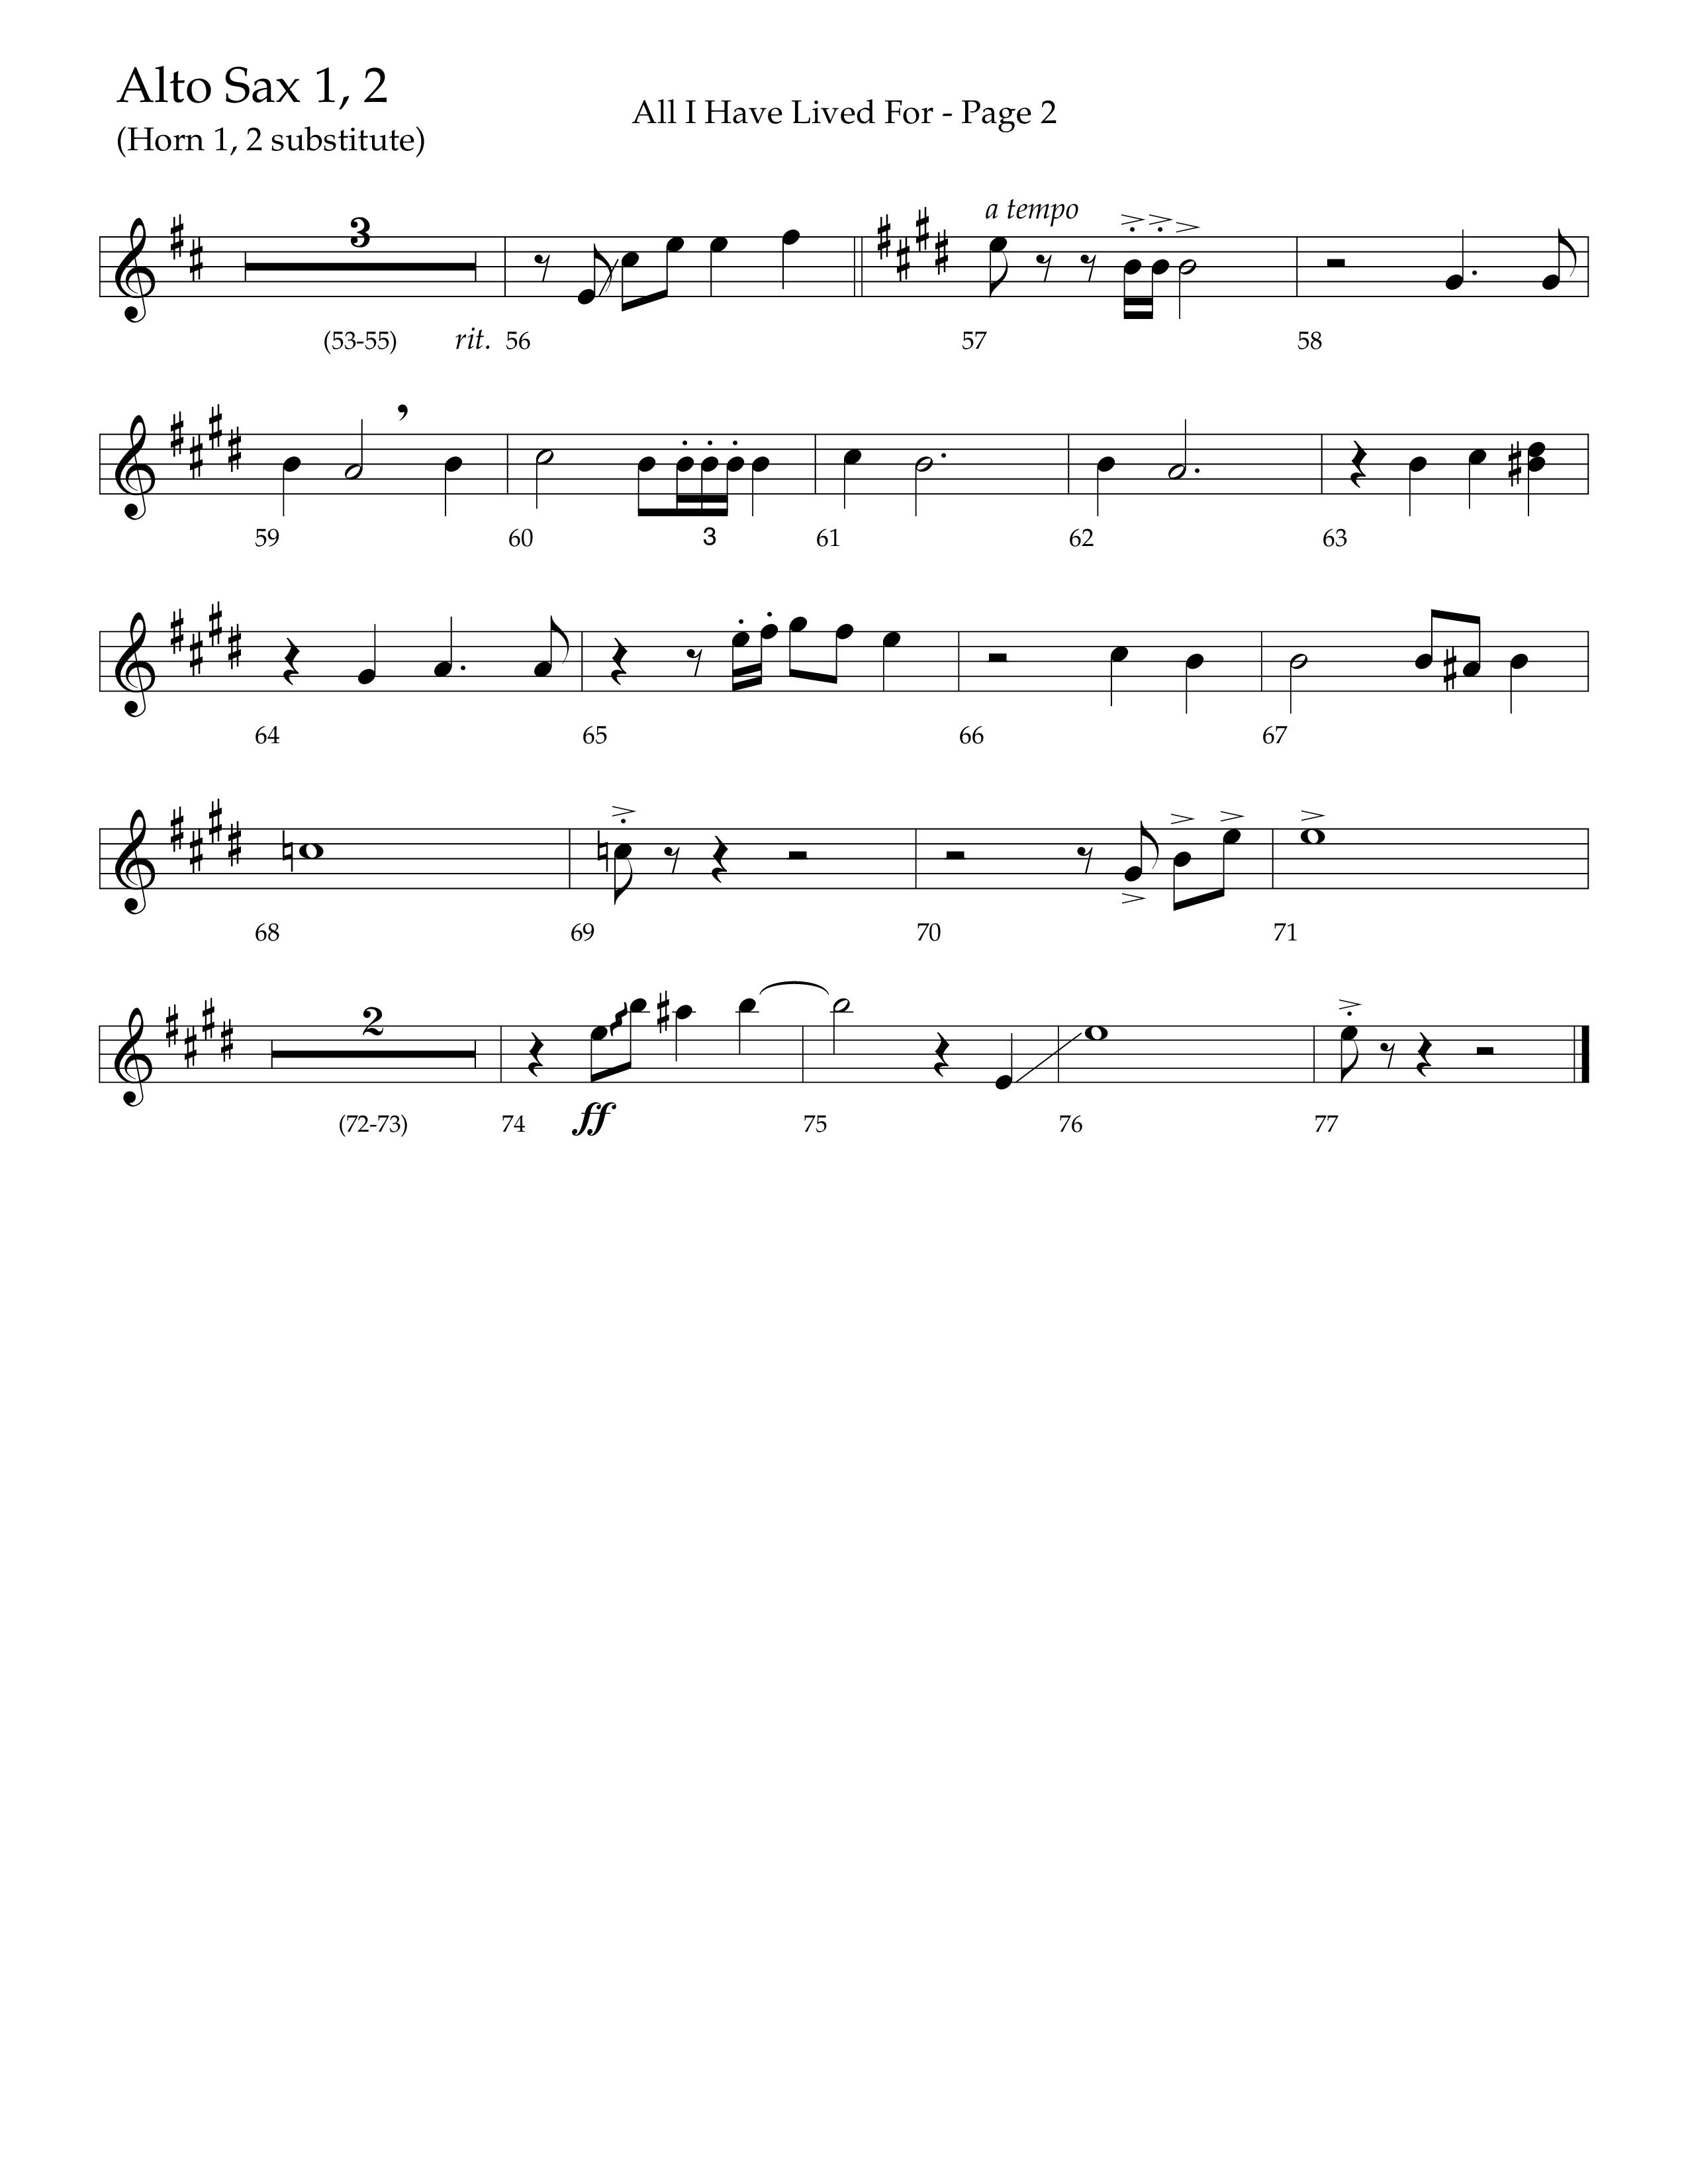 All I Have Lived For (Choral Anthem SATB) Alto Sax 1/2 (Lifeway Choral / Arr. Russell Mauldin)